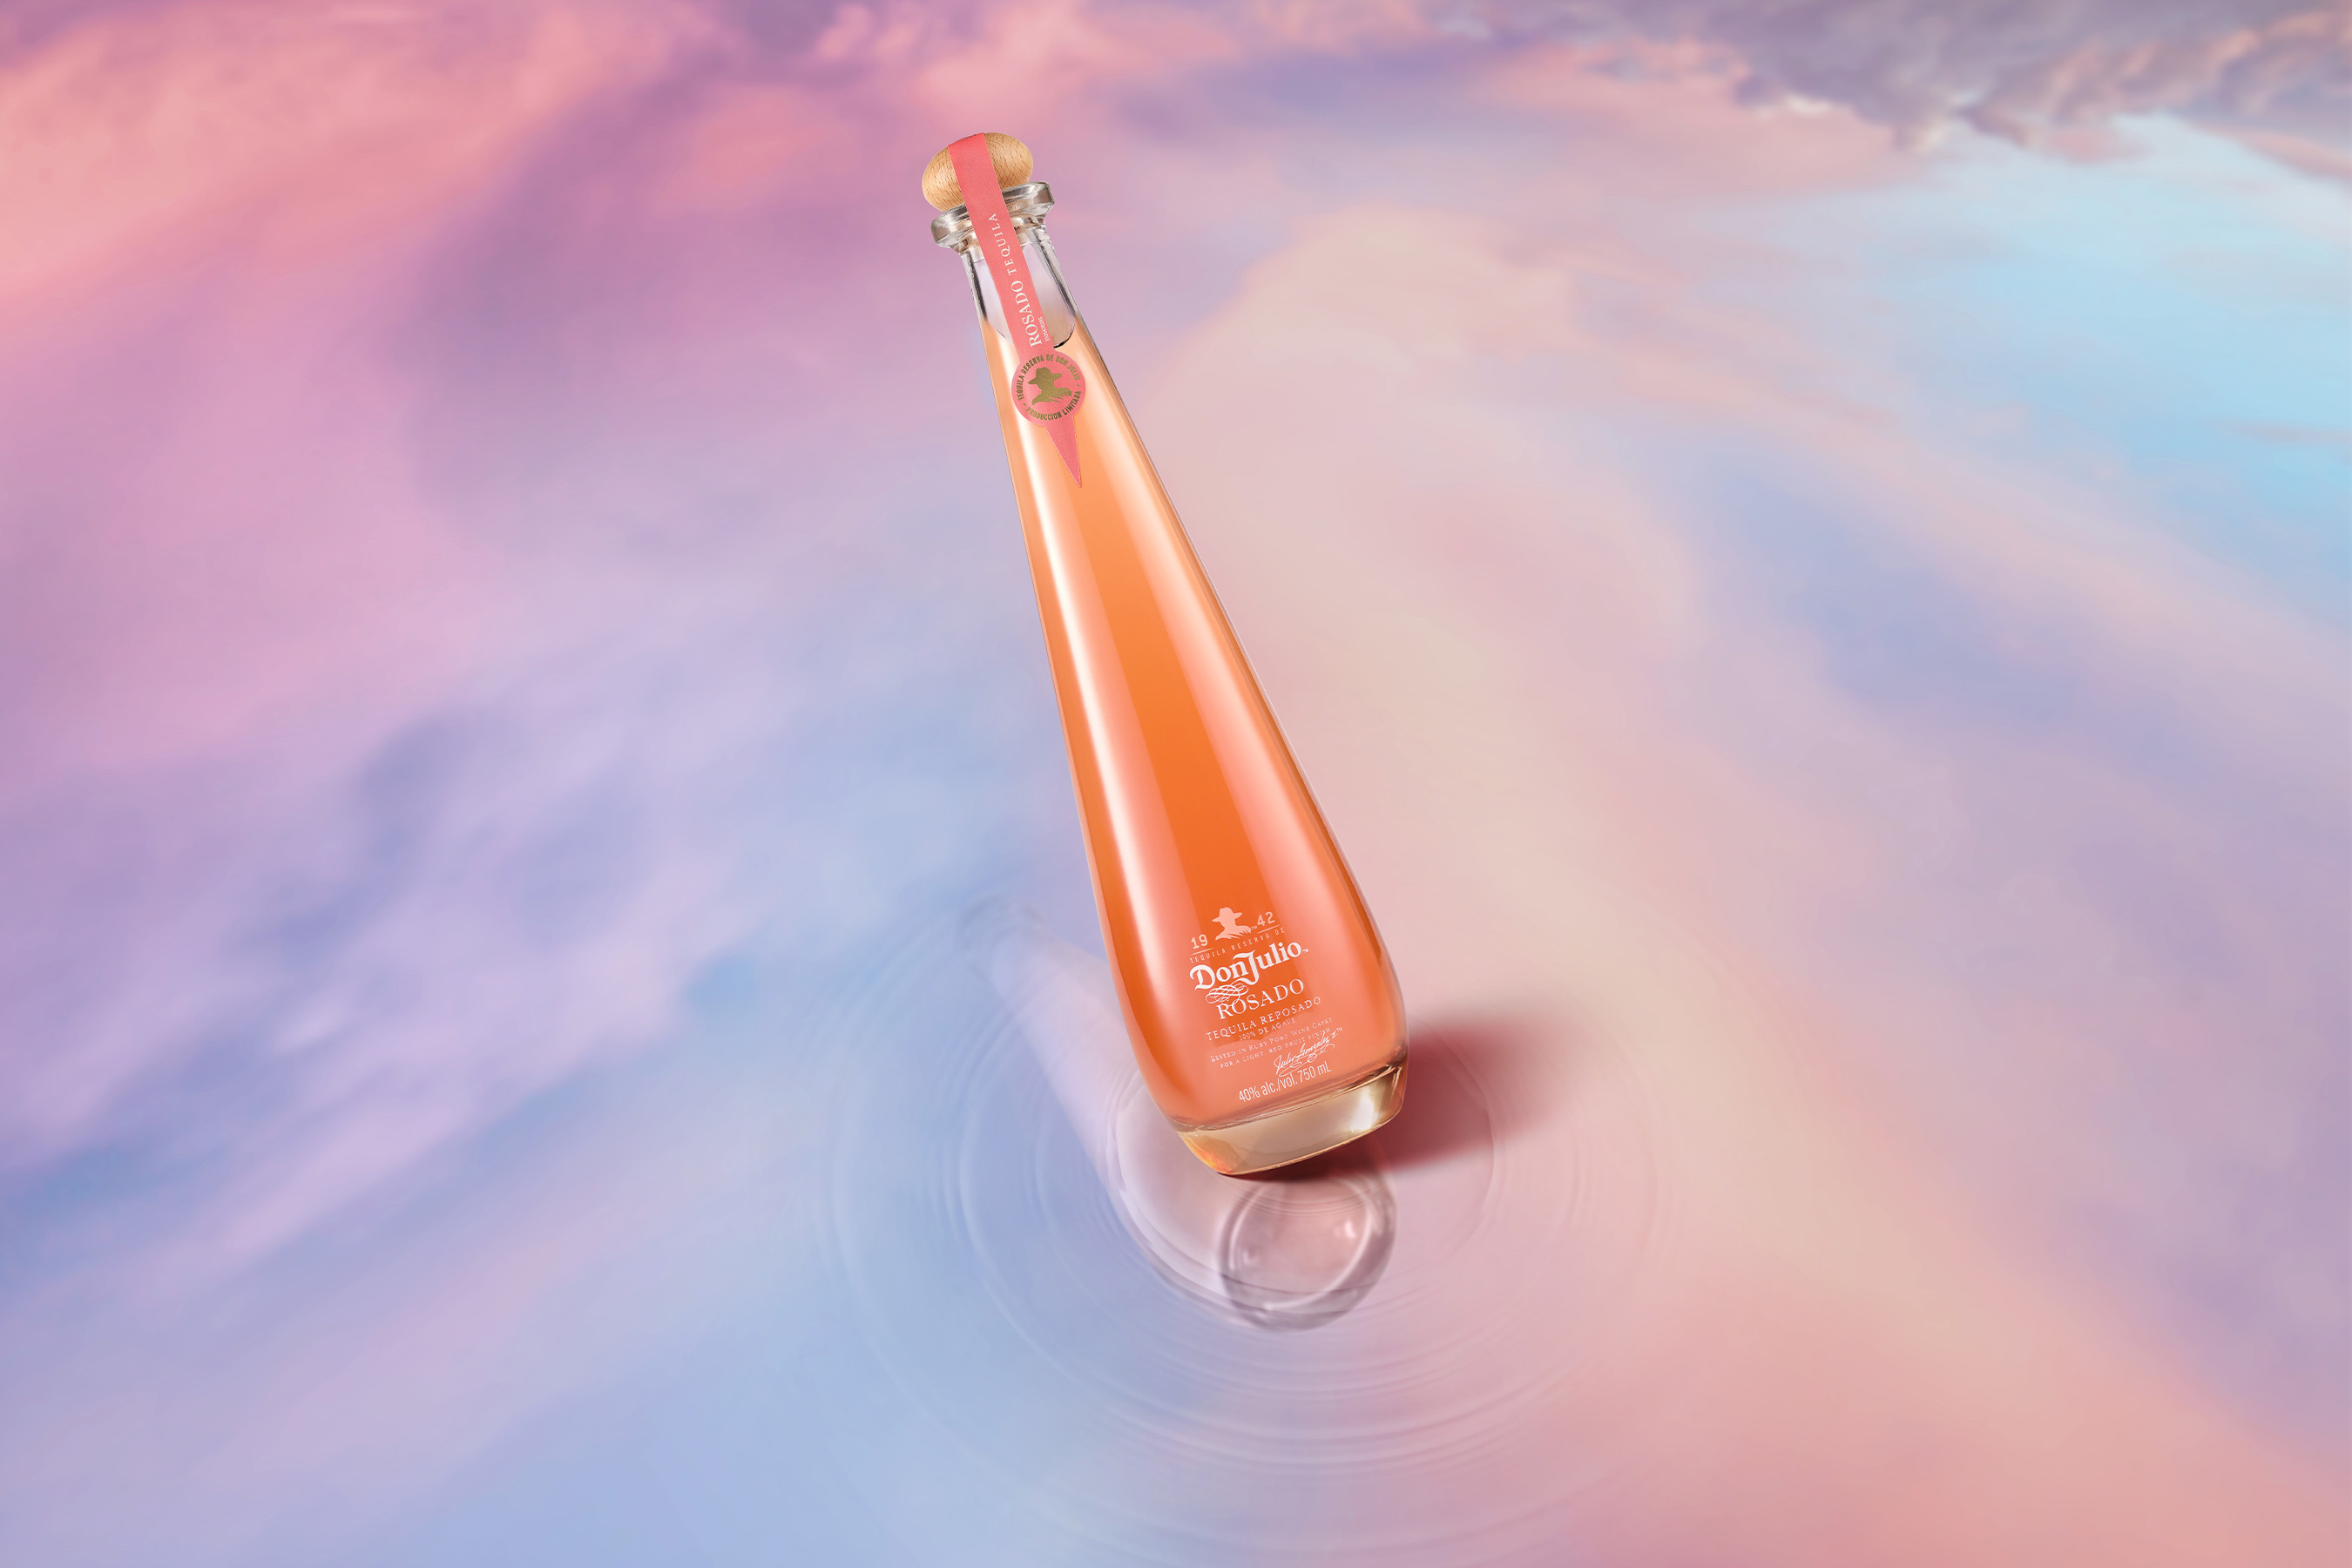 Tequila Don Julio, the leader in the luxury tequila category, is expanding its esteemed portfolio of luxury offerings with the introduction of Tequila Don Julio Rosado.